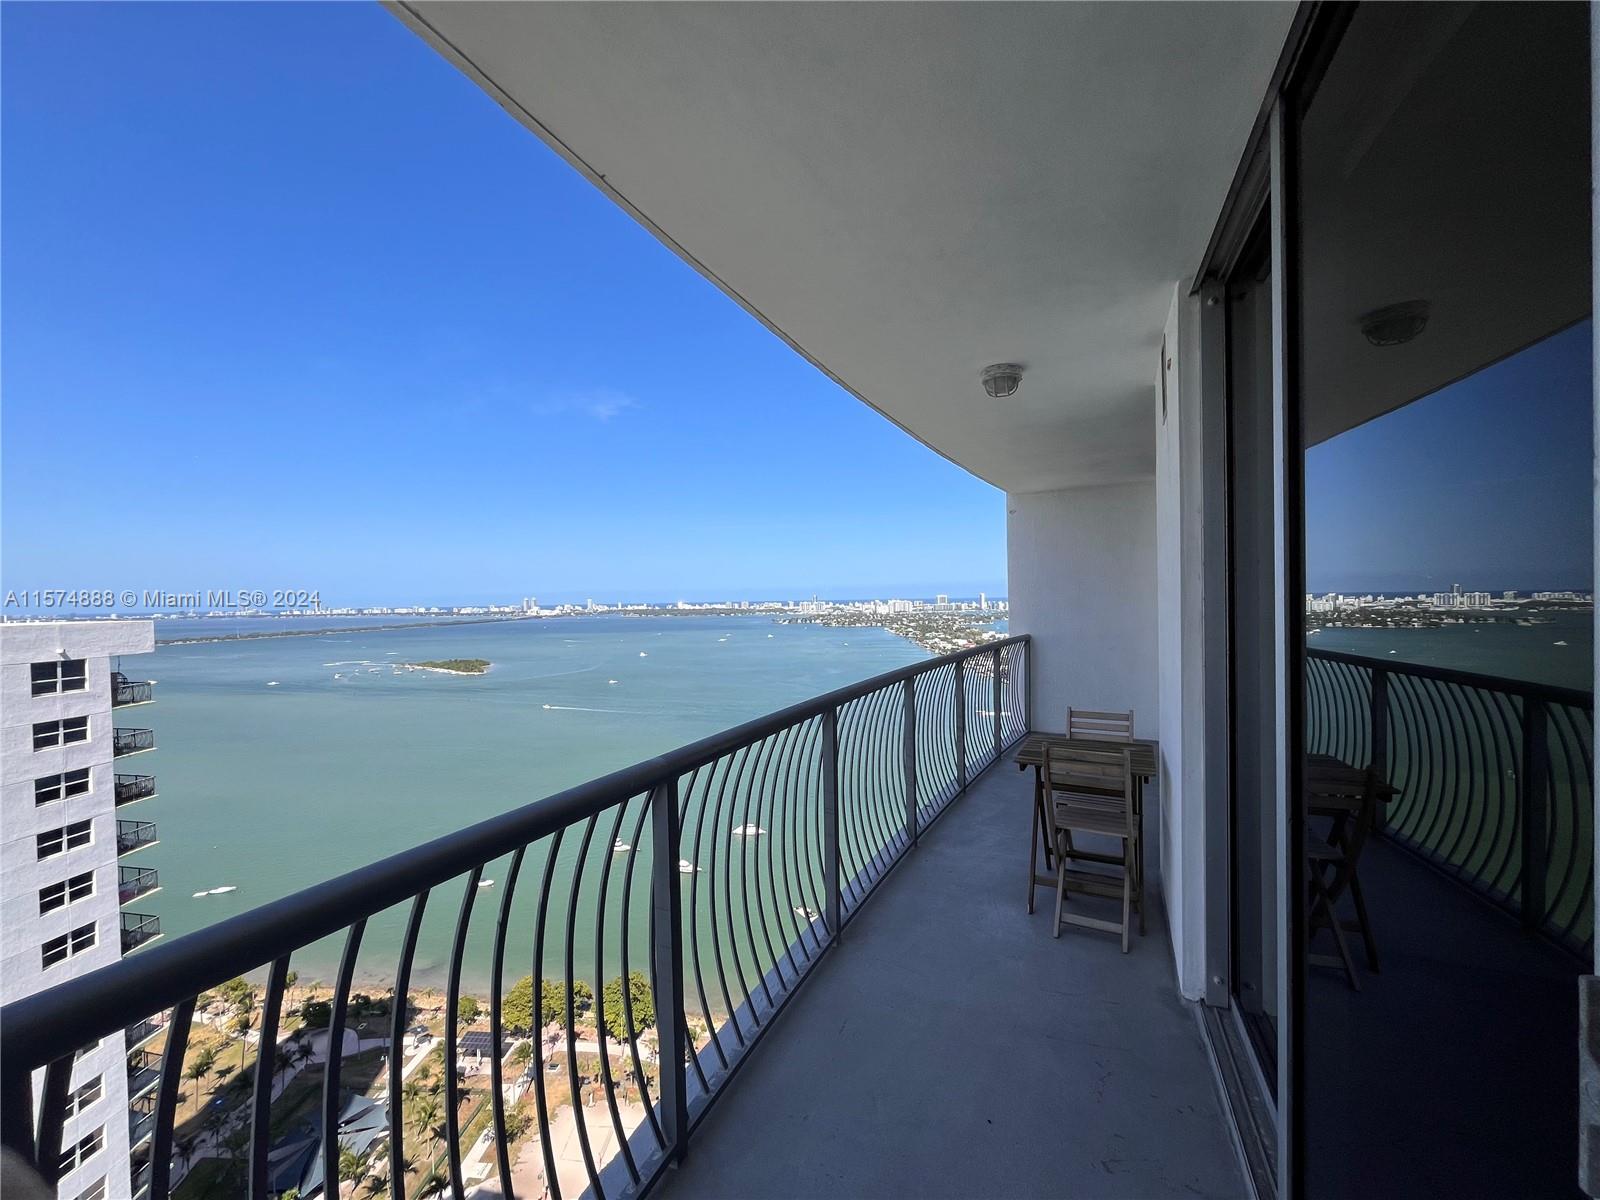 One bedroom one bathroom at Opera Tower overlooking Biscayne Bay views from your balcony. Kitchen is fully equipped with granite counter top and stainless steel appliances, washer and dryer inside unit, spacious bedroom with walking closet. Building offers gym, sauna, BBQ area, social room, pool, jacuzzi and Security front desk and valet parking 24/7. Opera Tower Edgewater location is conveniently located across from Casa Donna restaurant, Margaret Pace Park, and walking distance to Publix, shops, variety of restaurants, cafes, Metro Mover, and minutes away from the Arch Center of the Performing Arts, Froze Museum, Kaseya Center, Miami Beach, Bayside, Wynwood, Miami Design District, Miami International Airport and more.